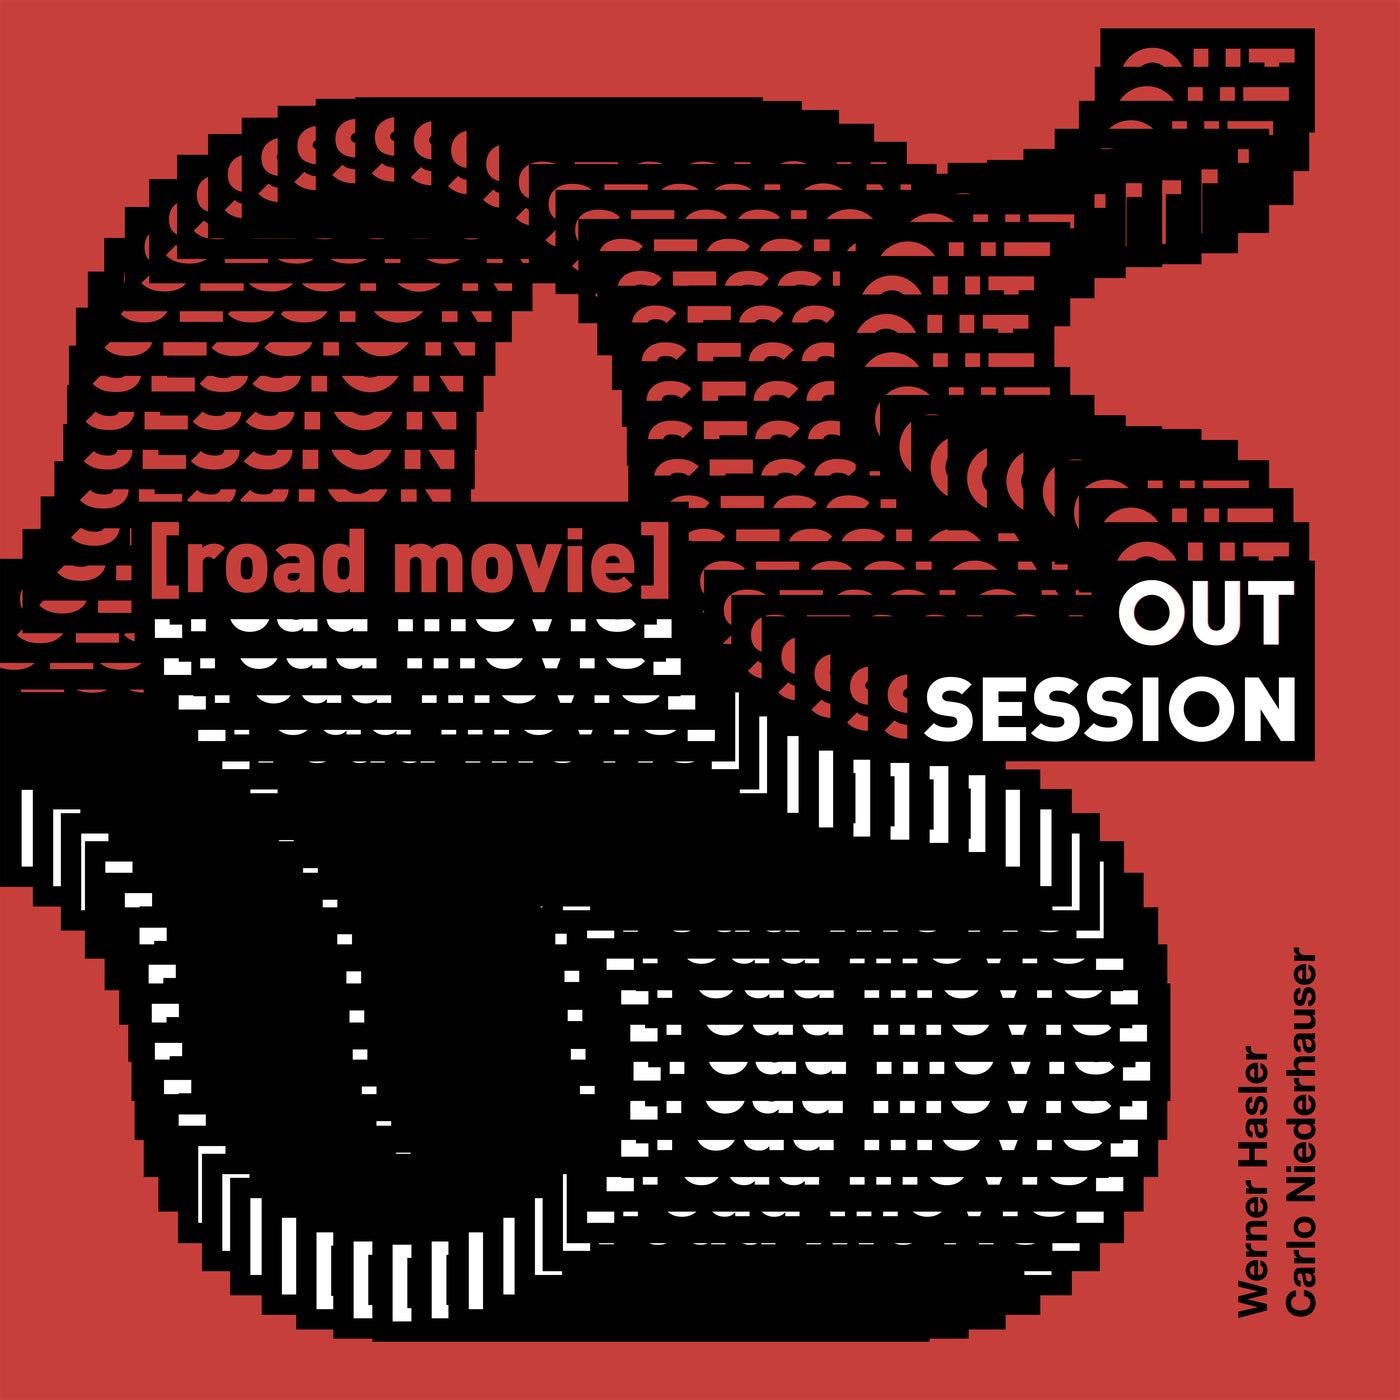 OUT Session (Road Movie)